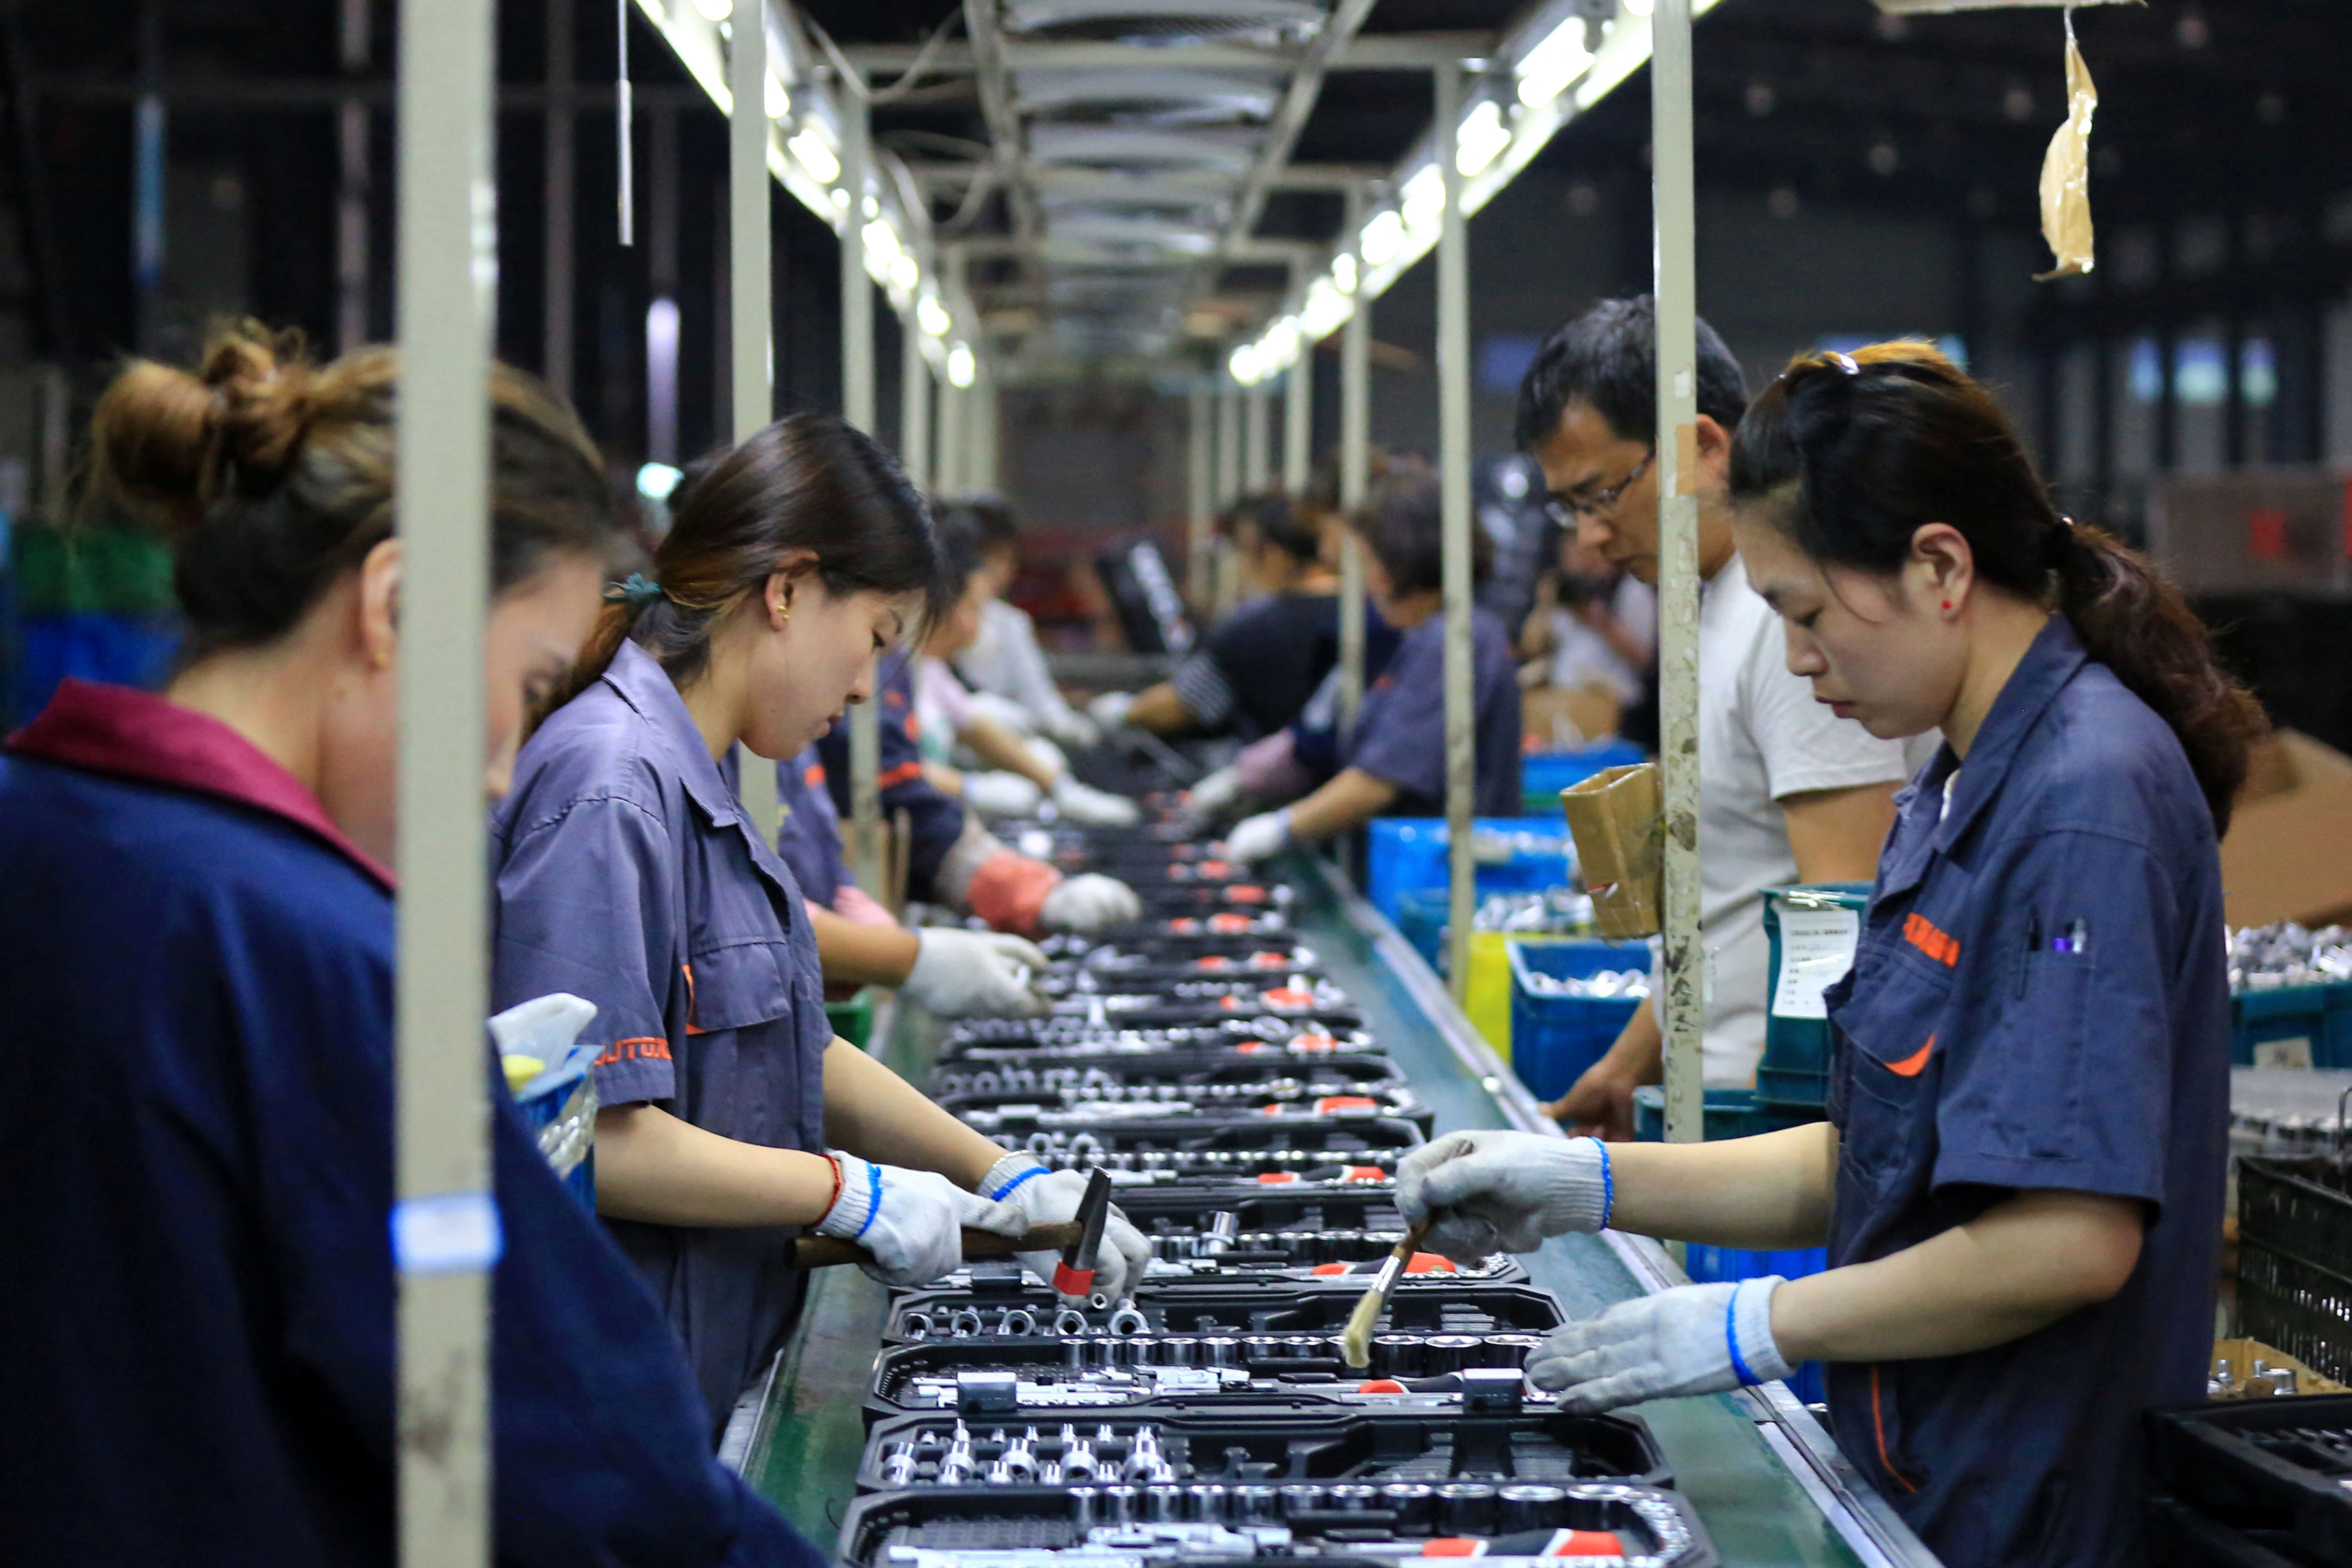 Employees work on a production line manufacturing tools at a factory in Huaian